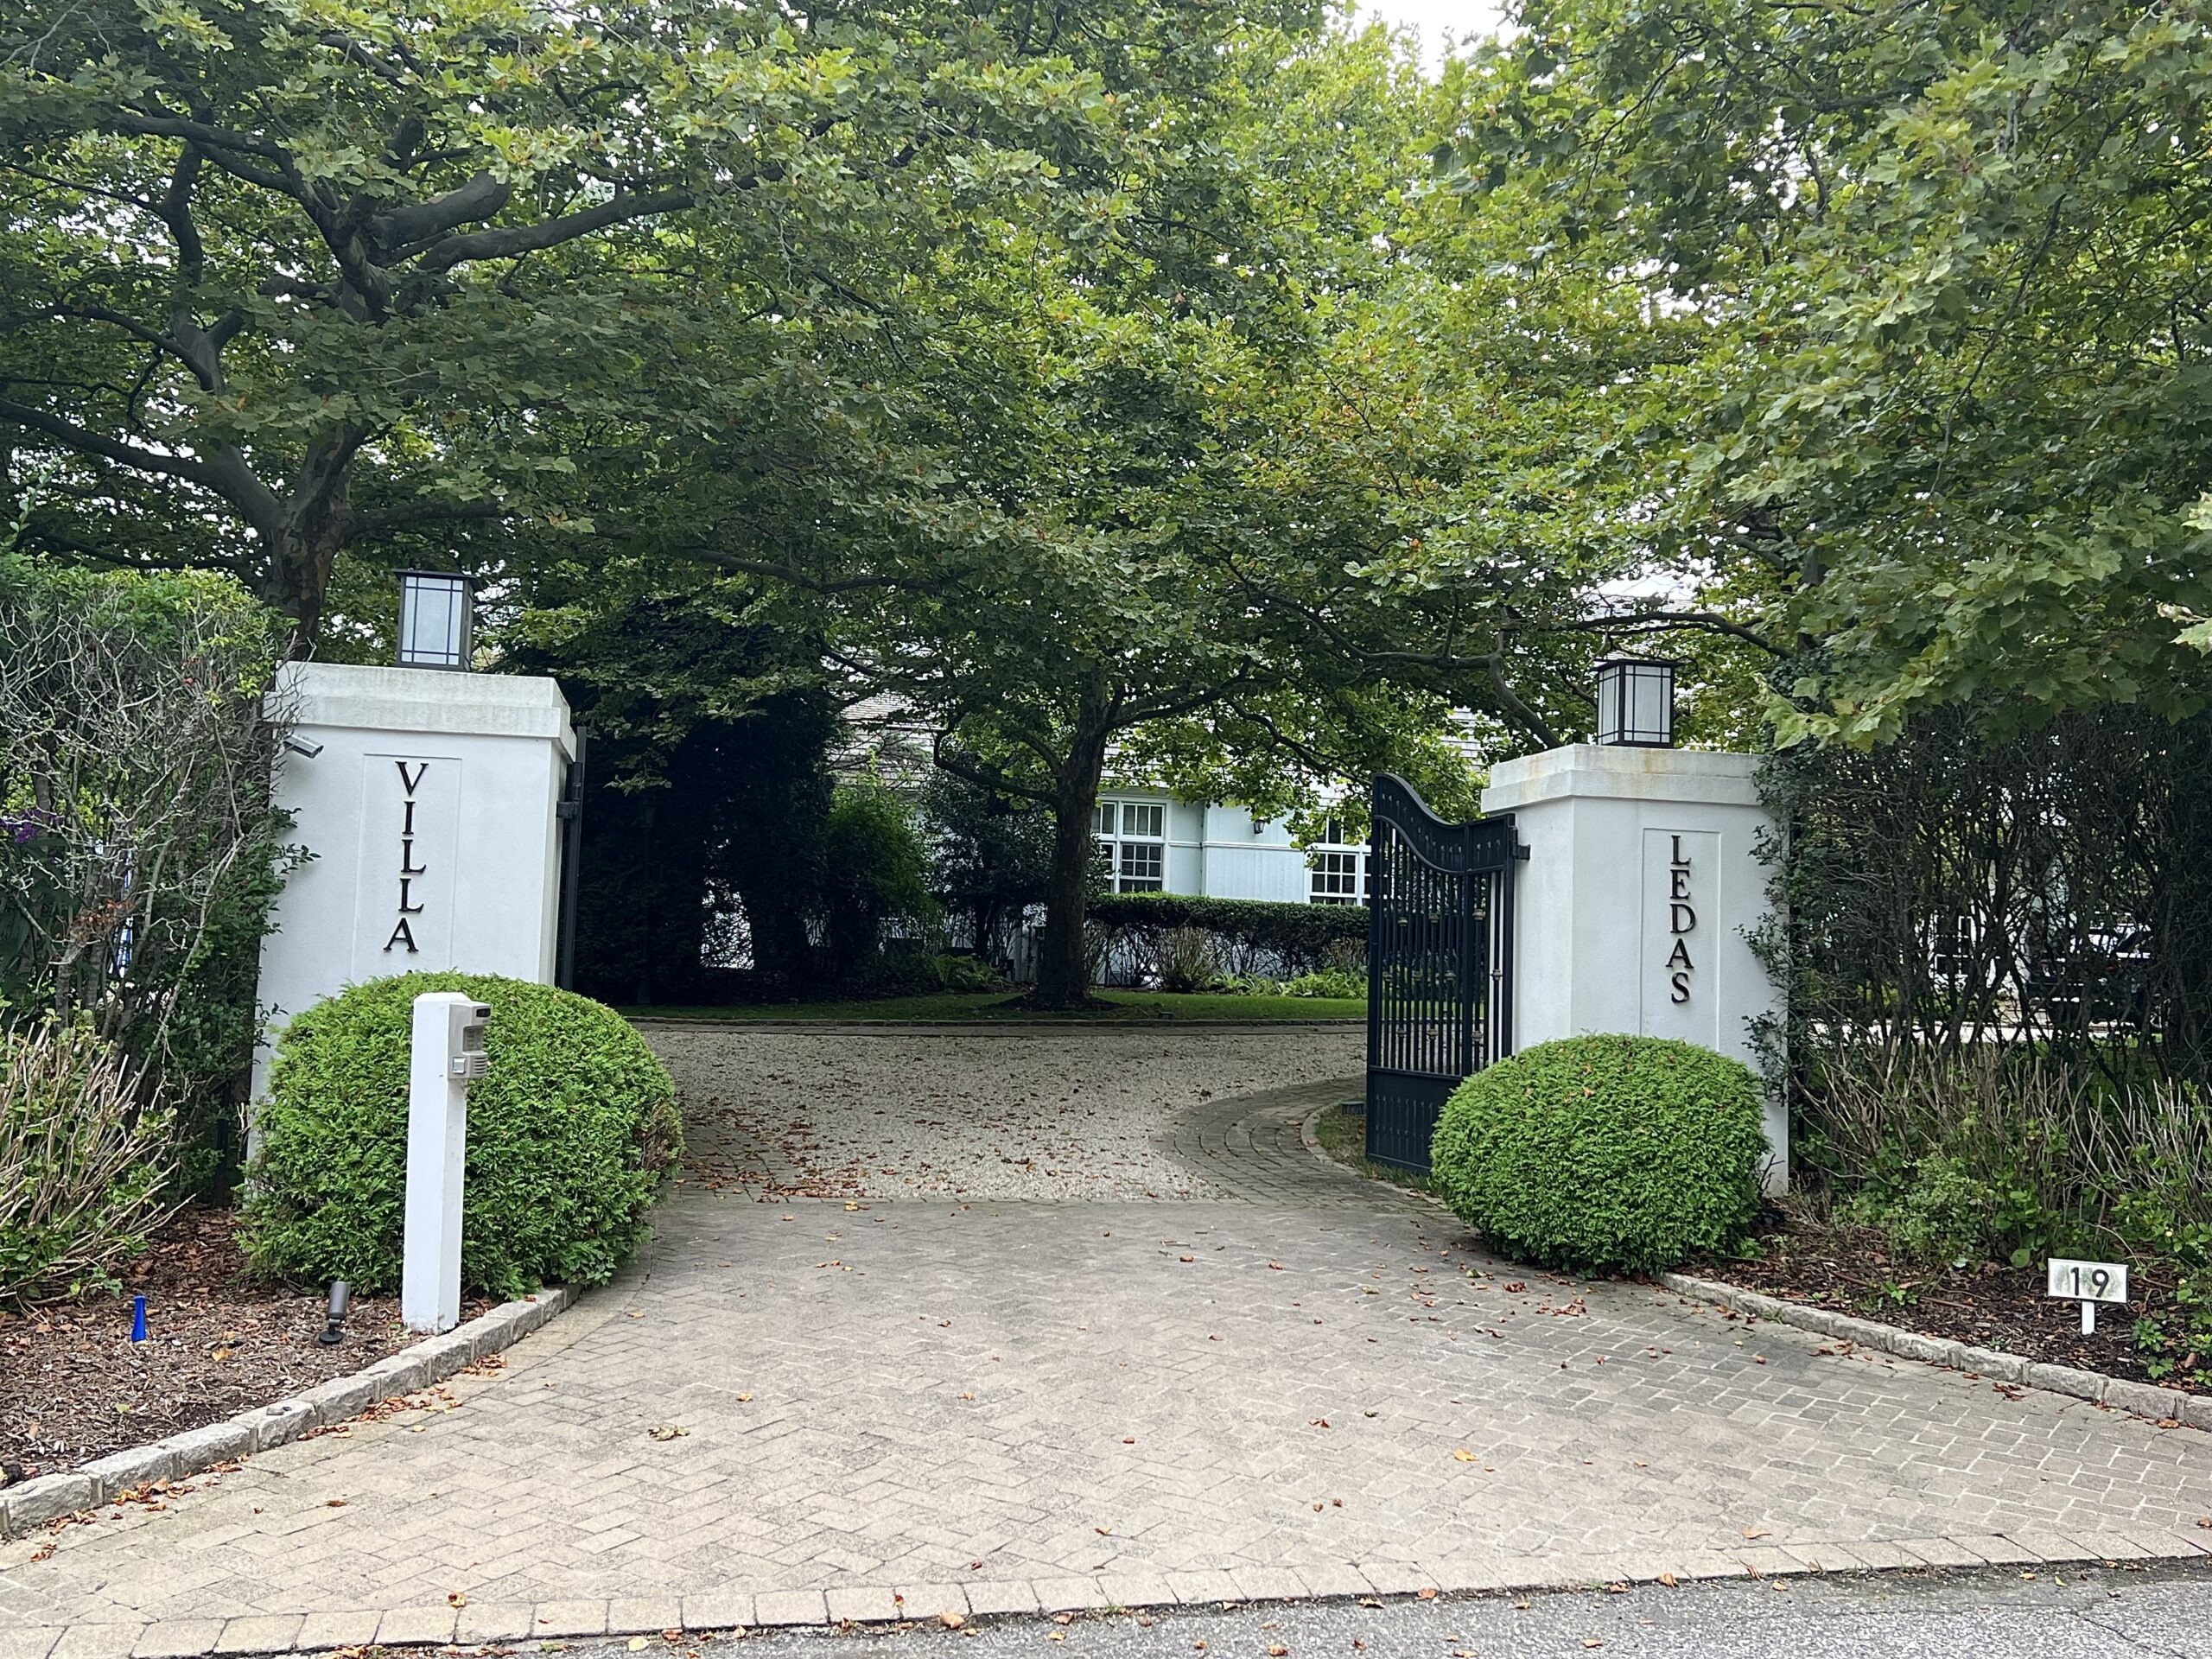 The FBI and Department of Homeland Security raided a Southampton Village estate last week that is believed to be owned by a Russian oligarch whose assets have been frozen in retaliation for the Russian invasion of Ukraine.